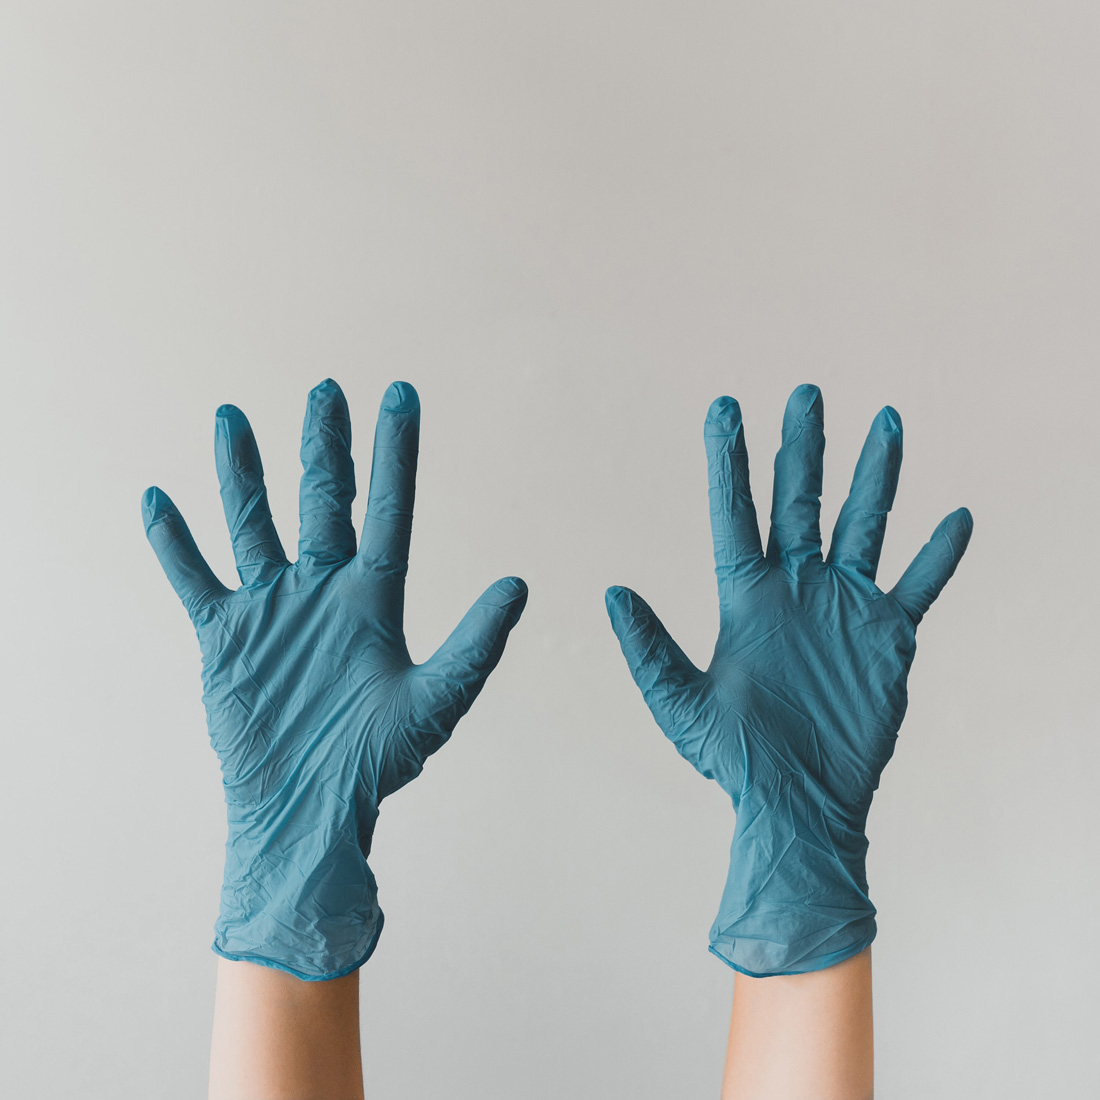 Two hands held in the air with aqua blue colored latex gloves